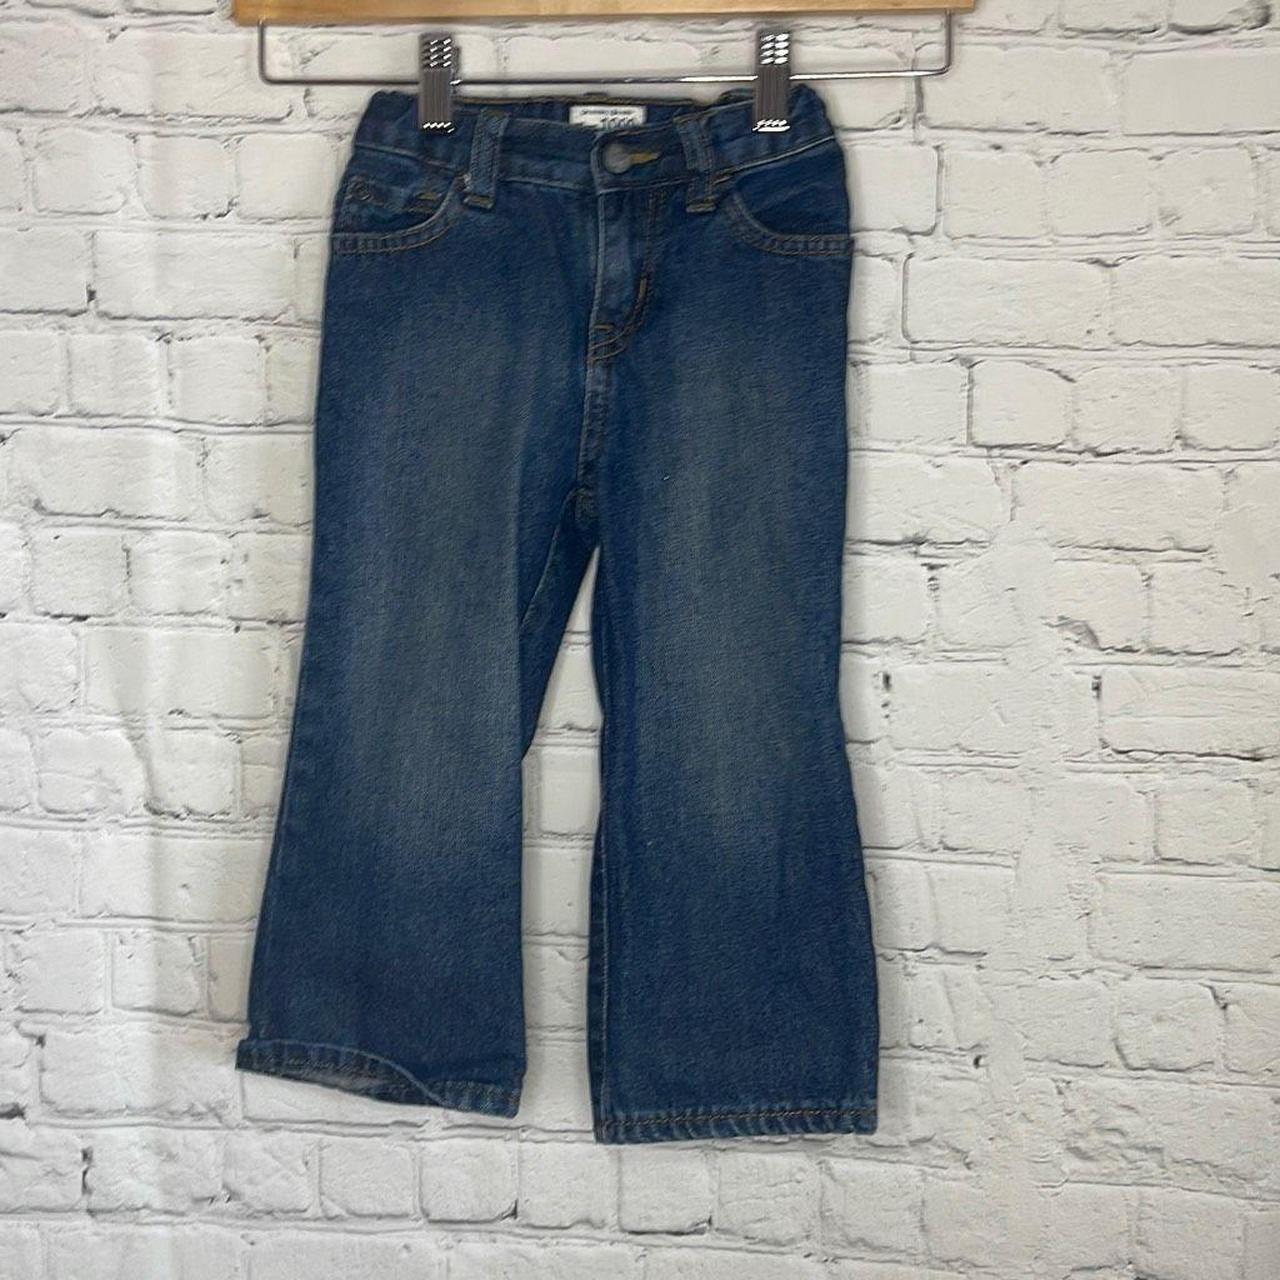 Childrens Place Bootcut Jeans, Kids Flared Jeans Girls